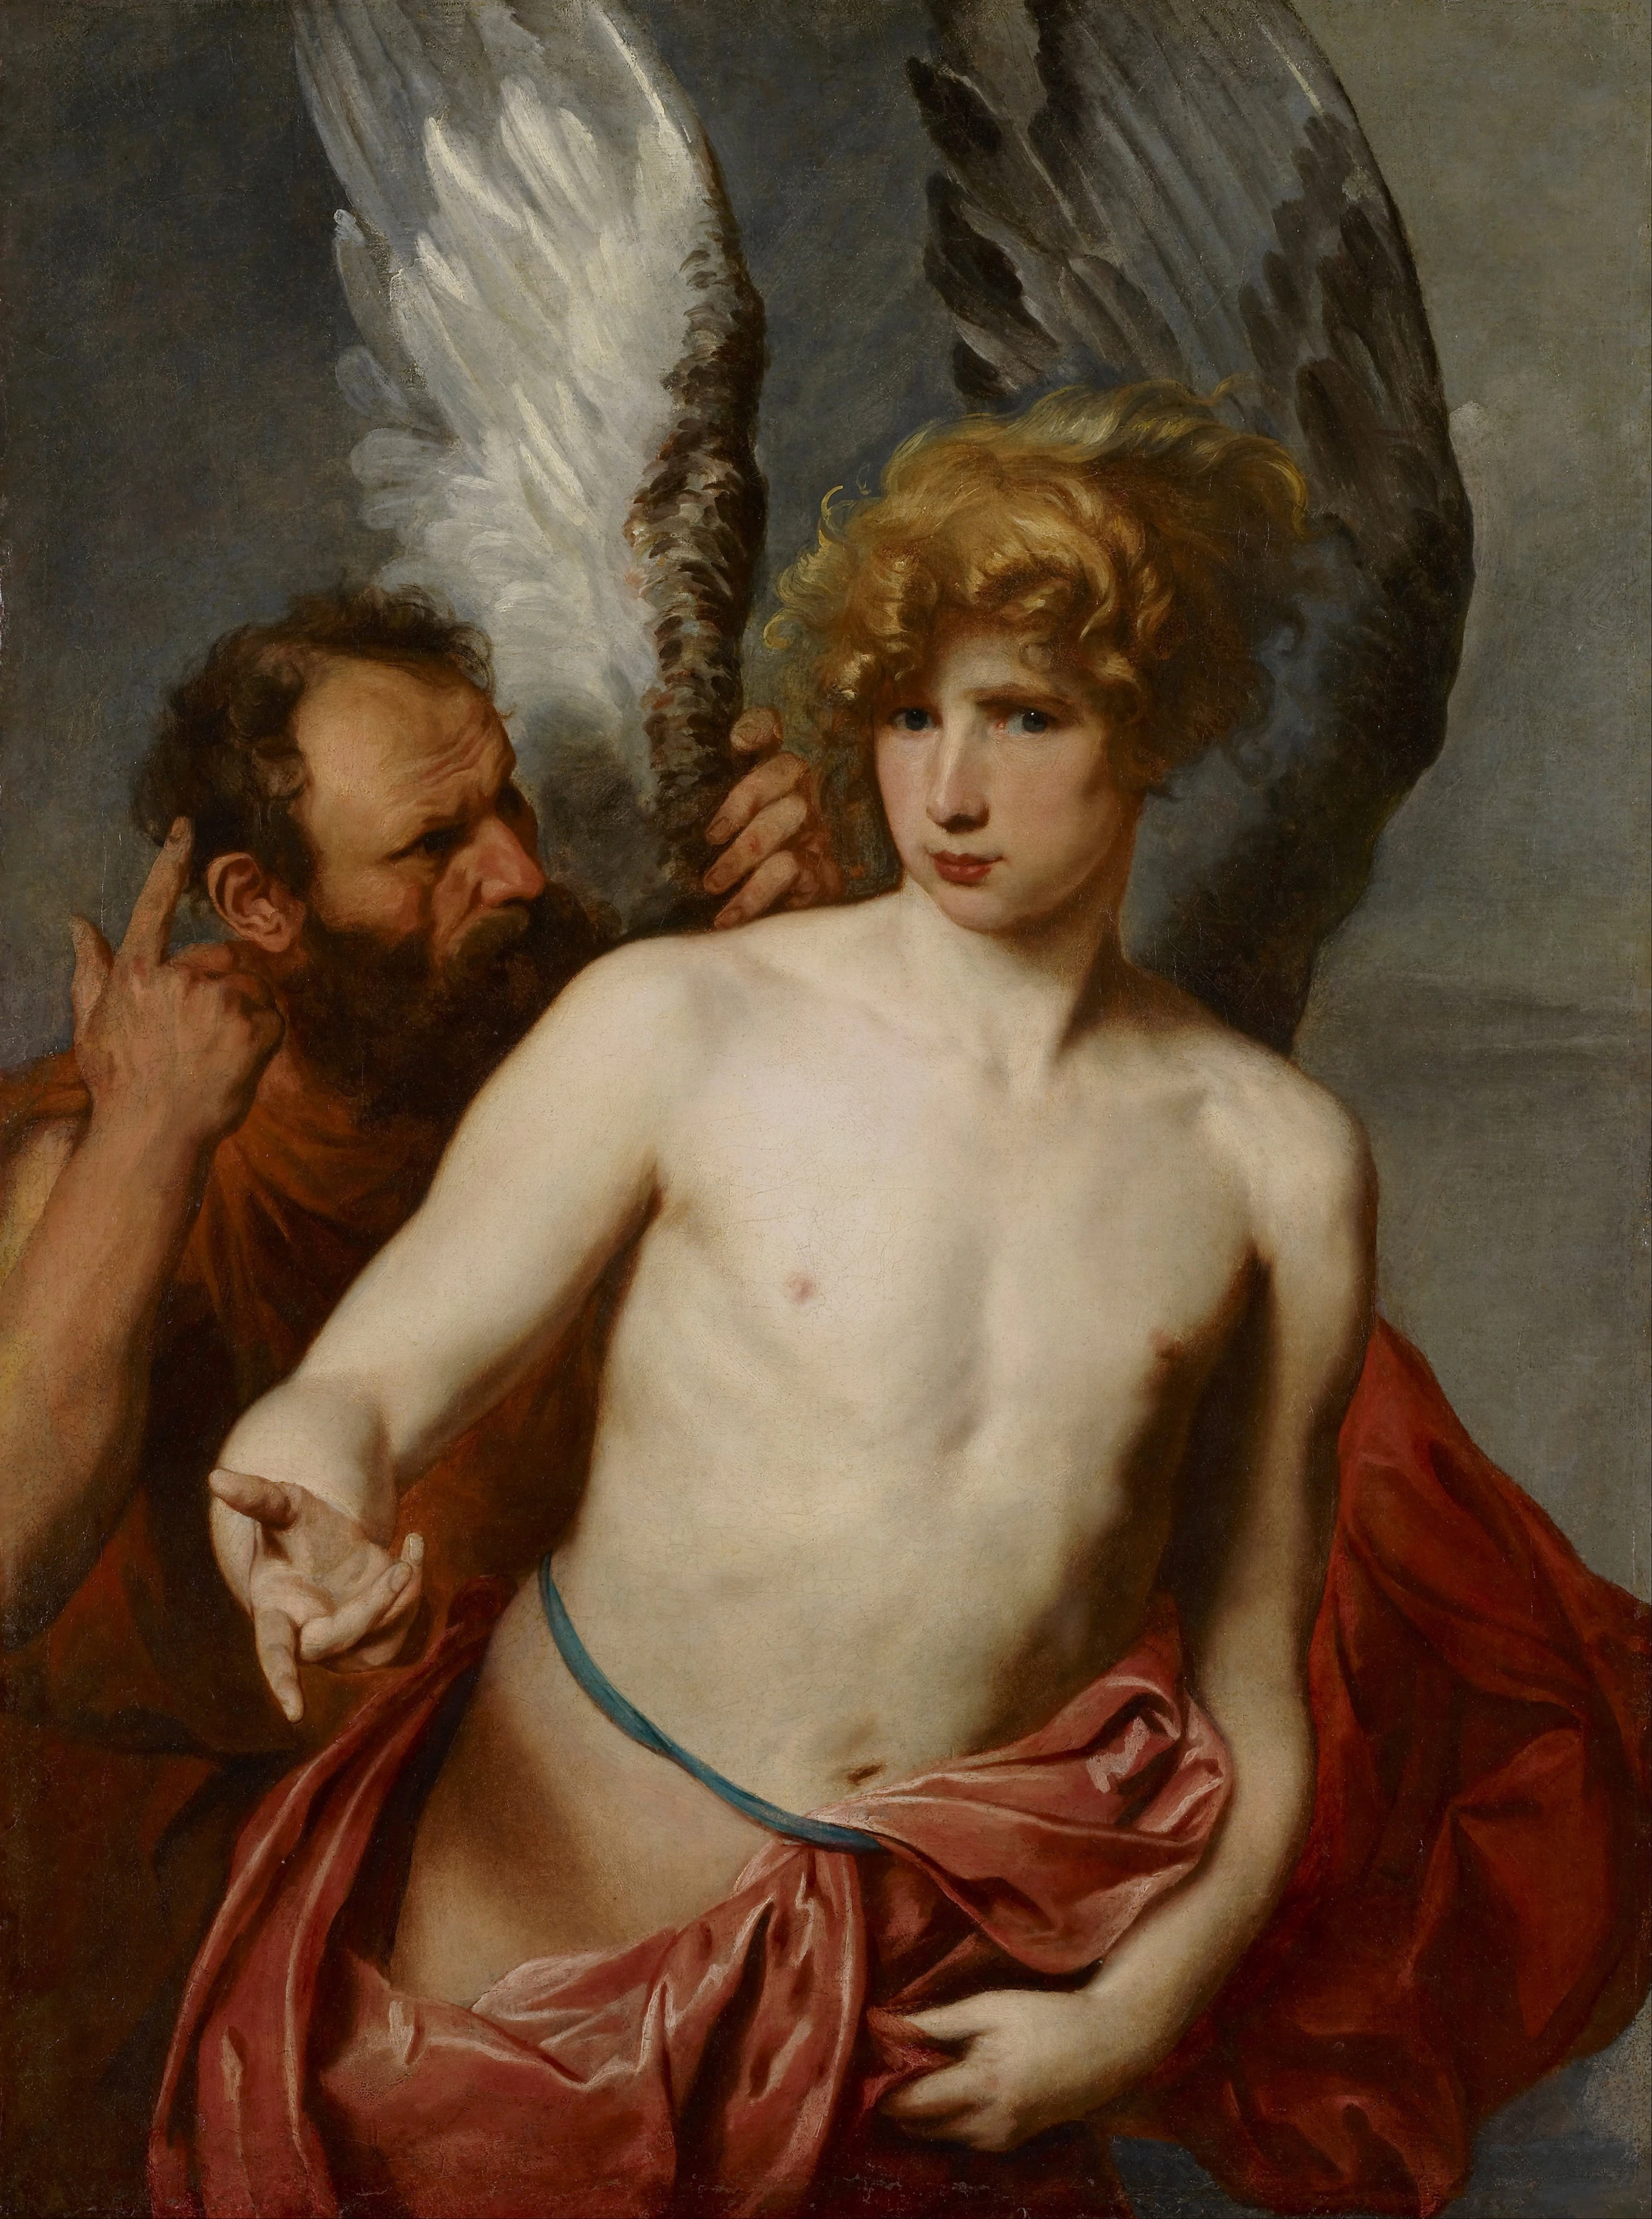 Daedalus and Icarus, Anthony van Dyck